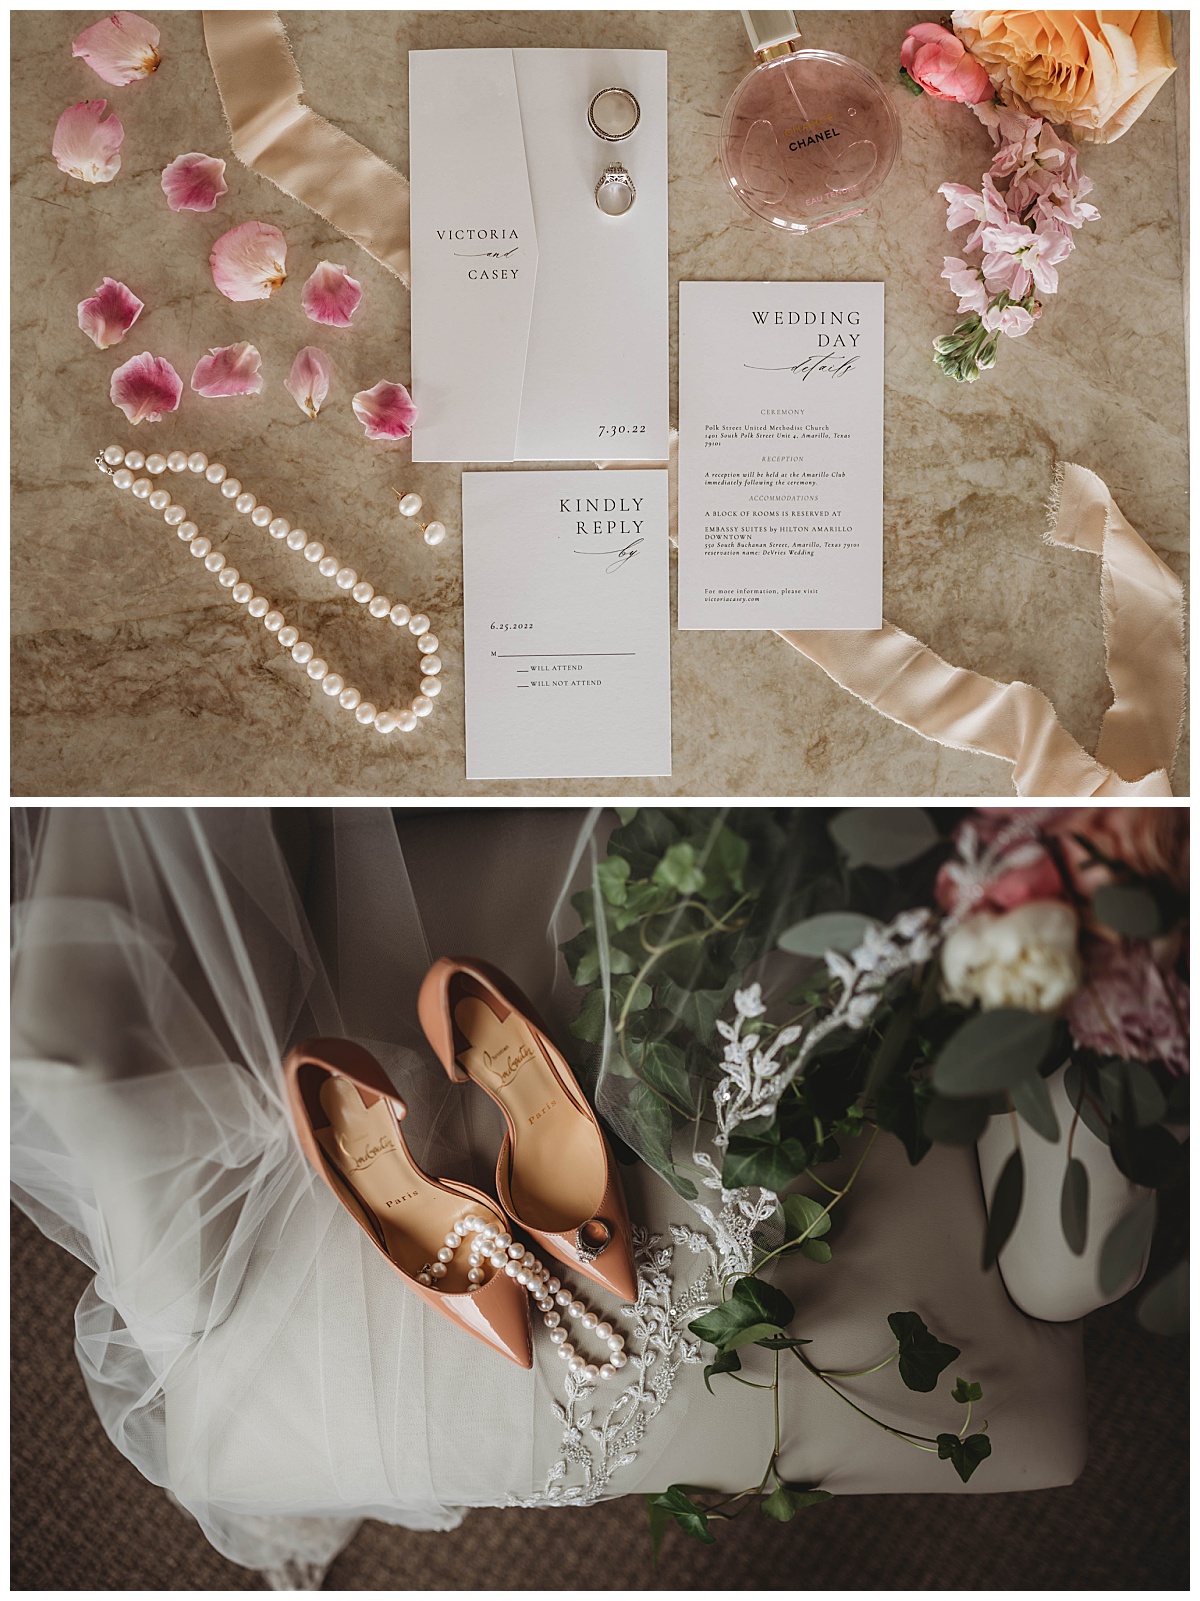 Invitation and bridal details by Three Feather Photography